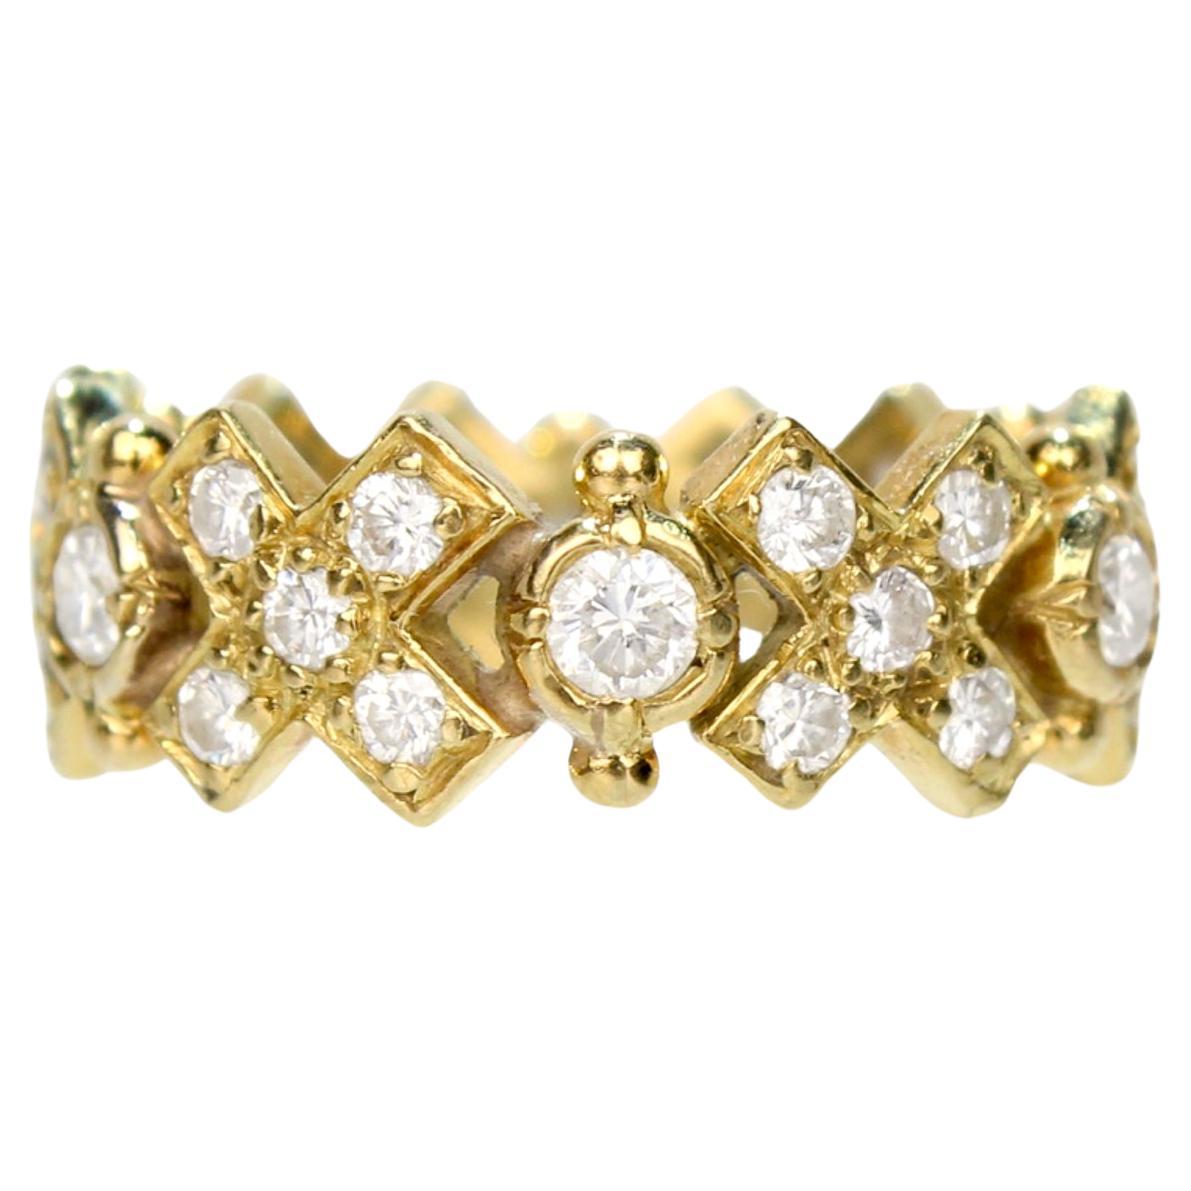 Elizabeth Gage 18 Karat Gold and Diamond Hugs and Kisses Band Ring For Sale